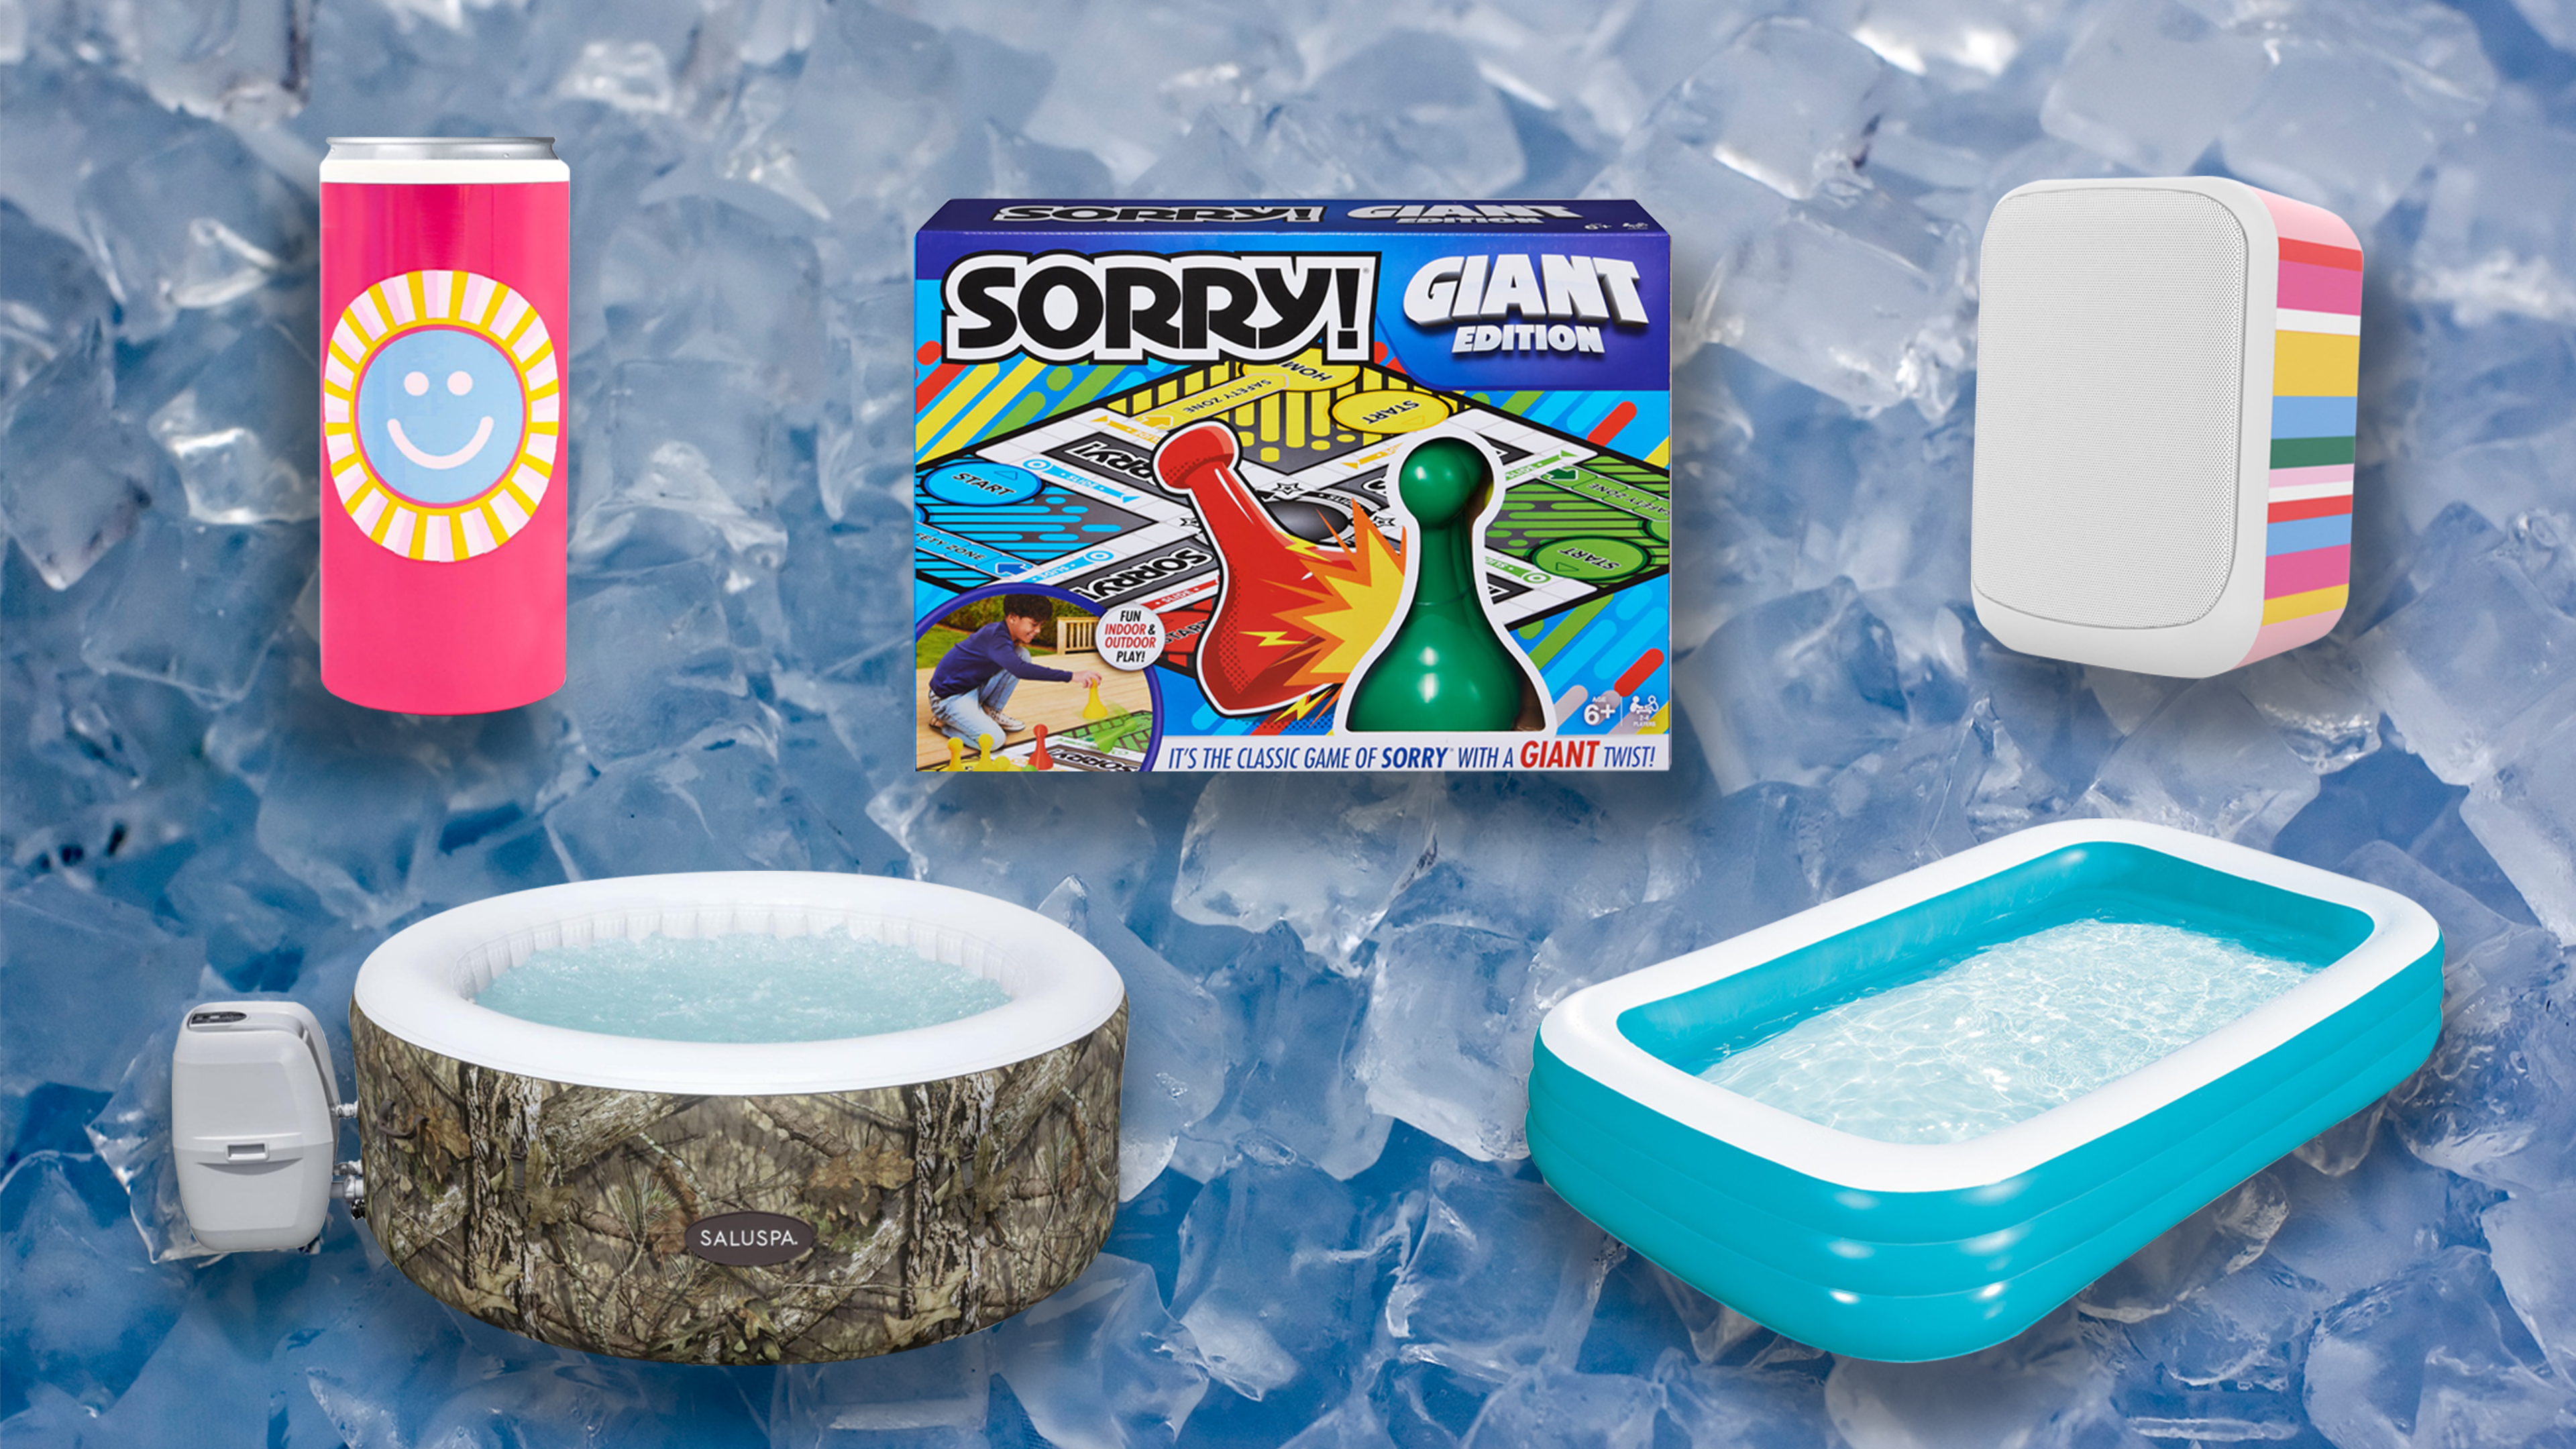 roundup of summer party products - inflatable pools, beverage holder, giant Sorry board game and colorful speaker